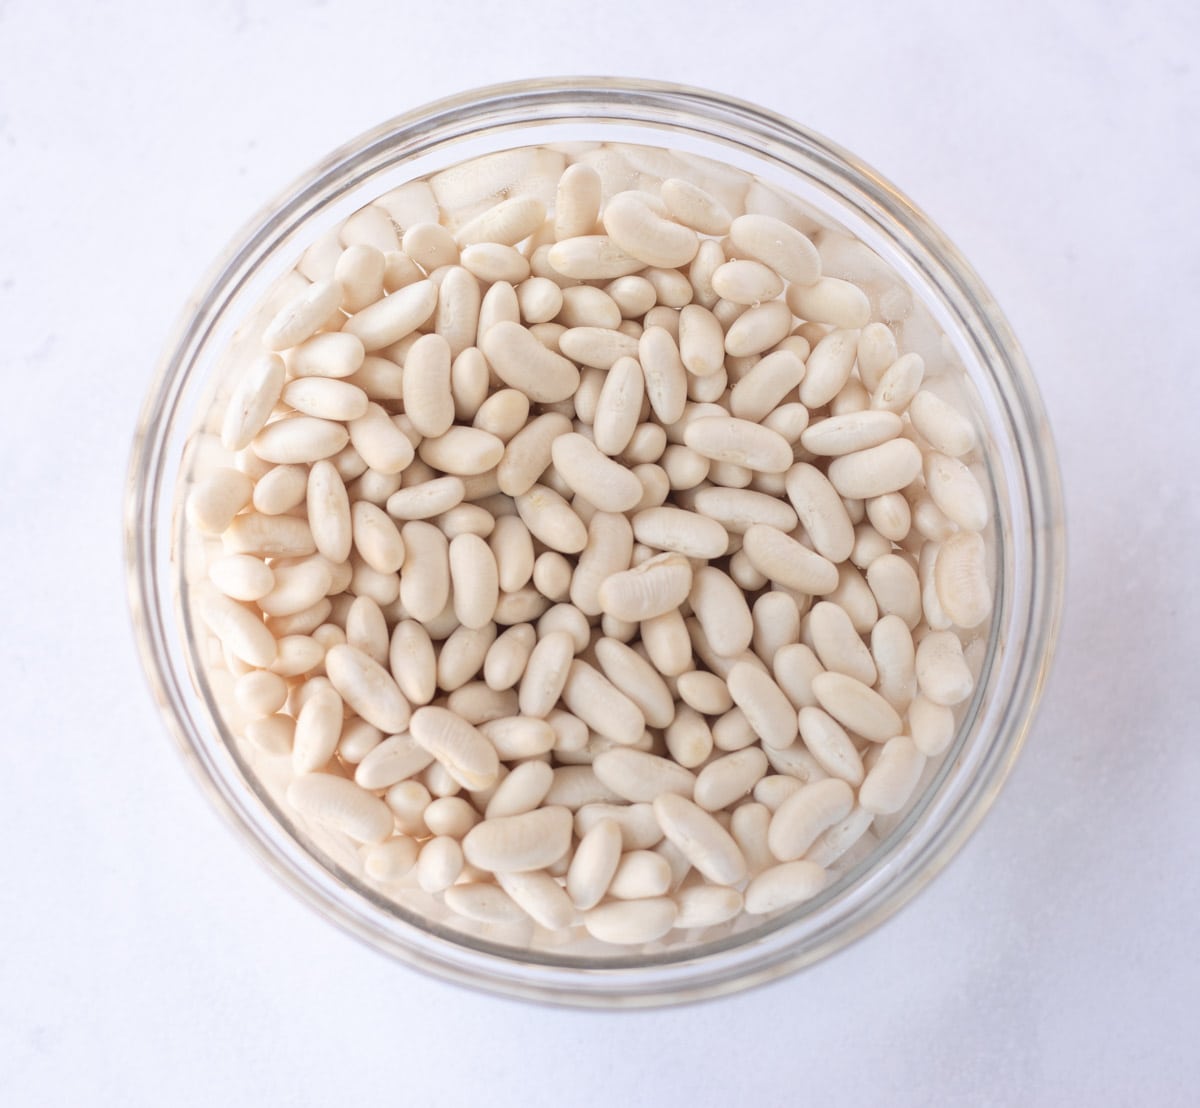 soaking white beans in water